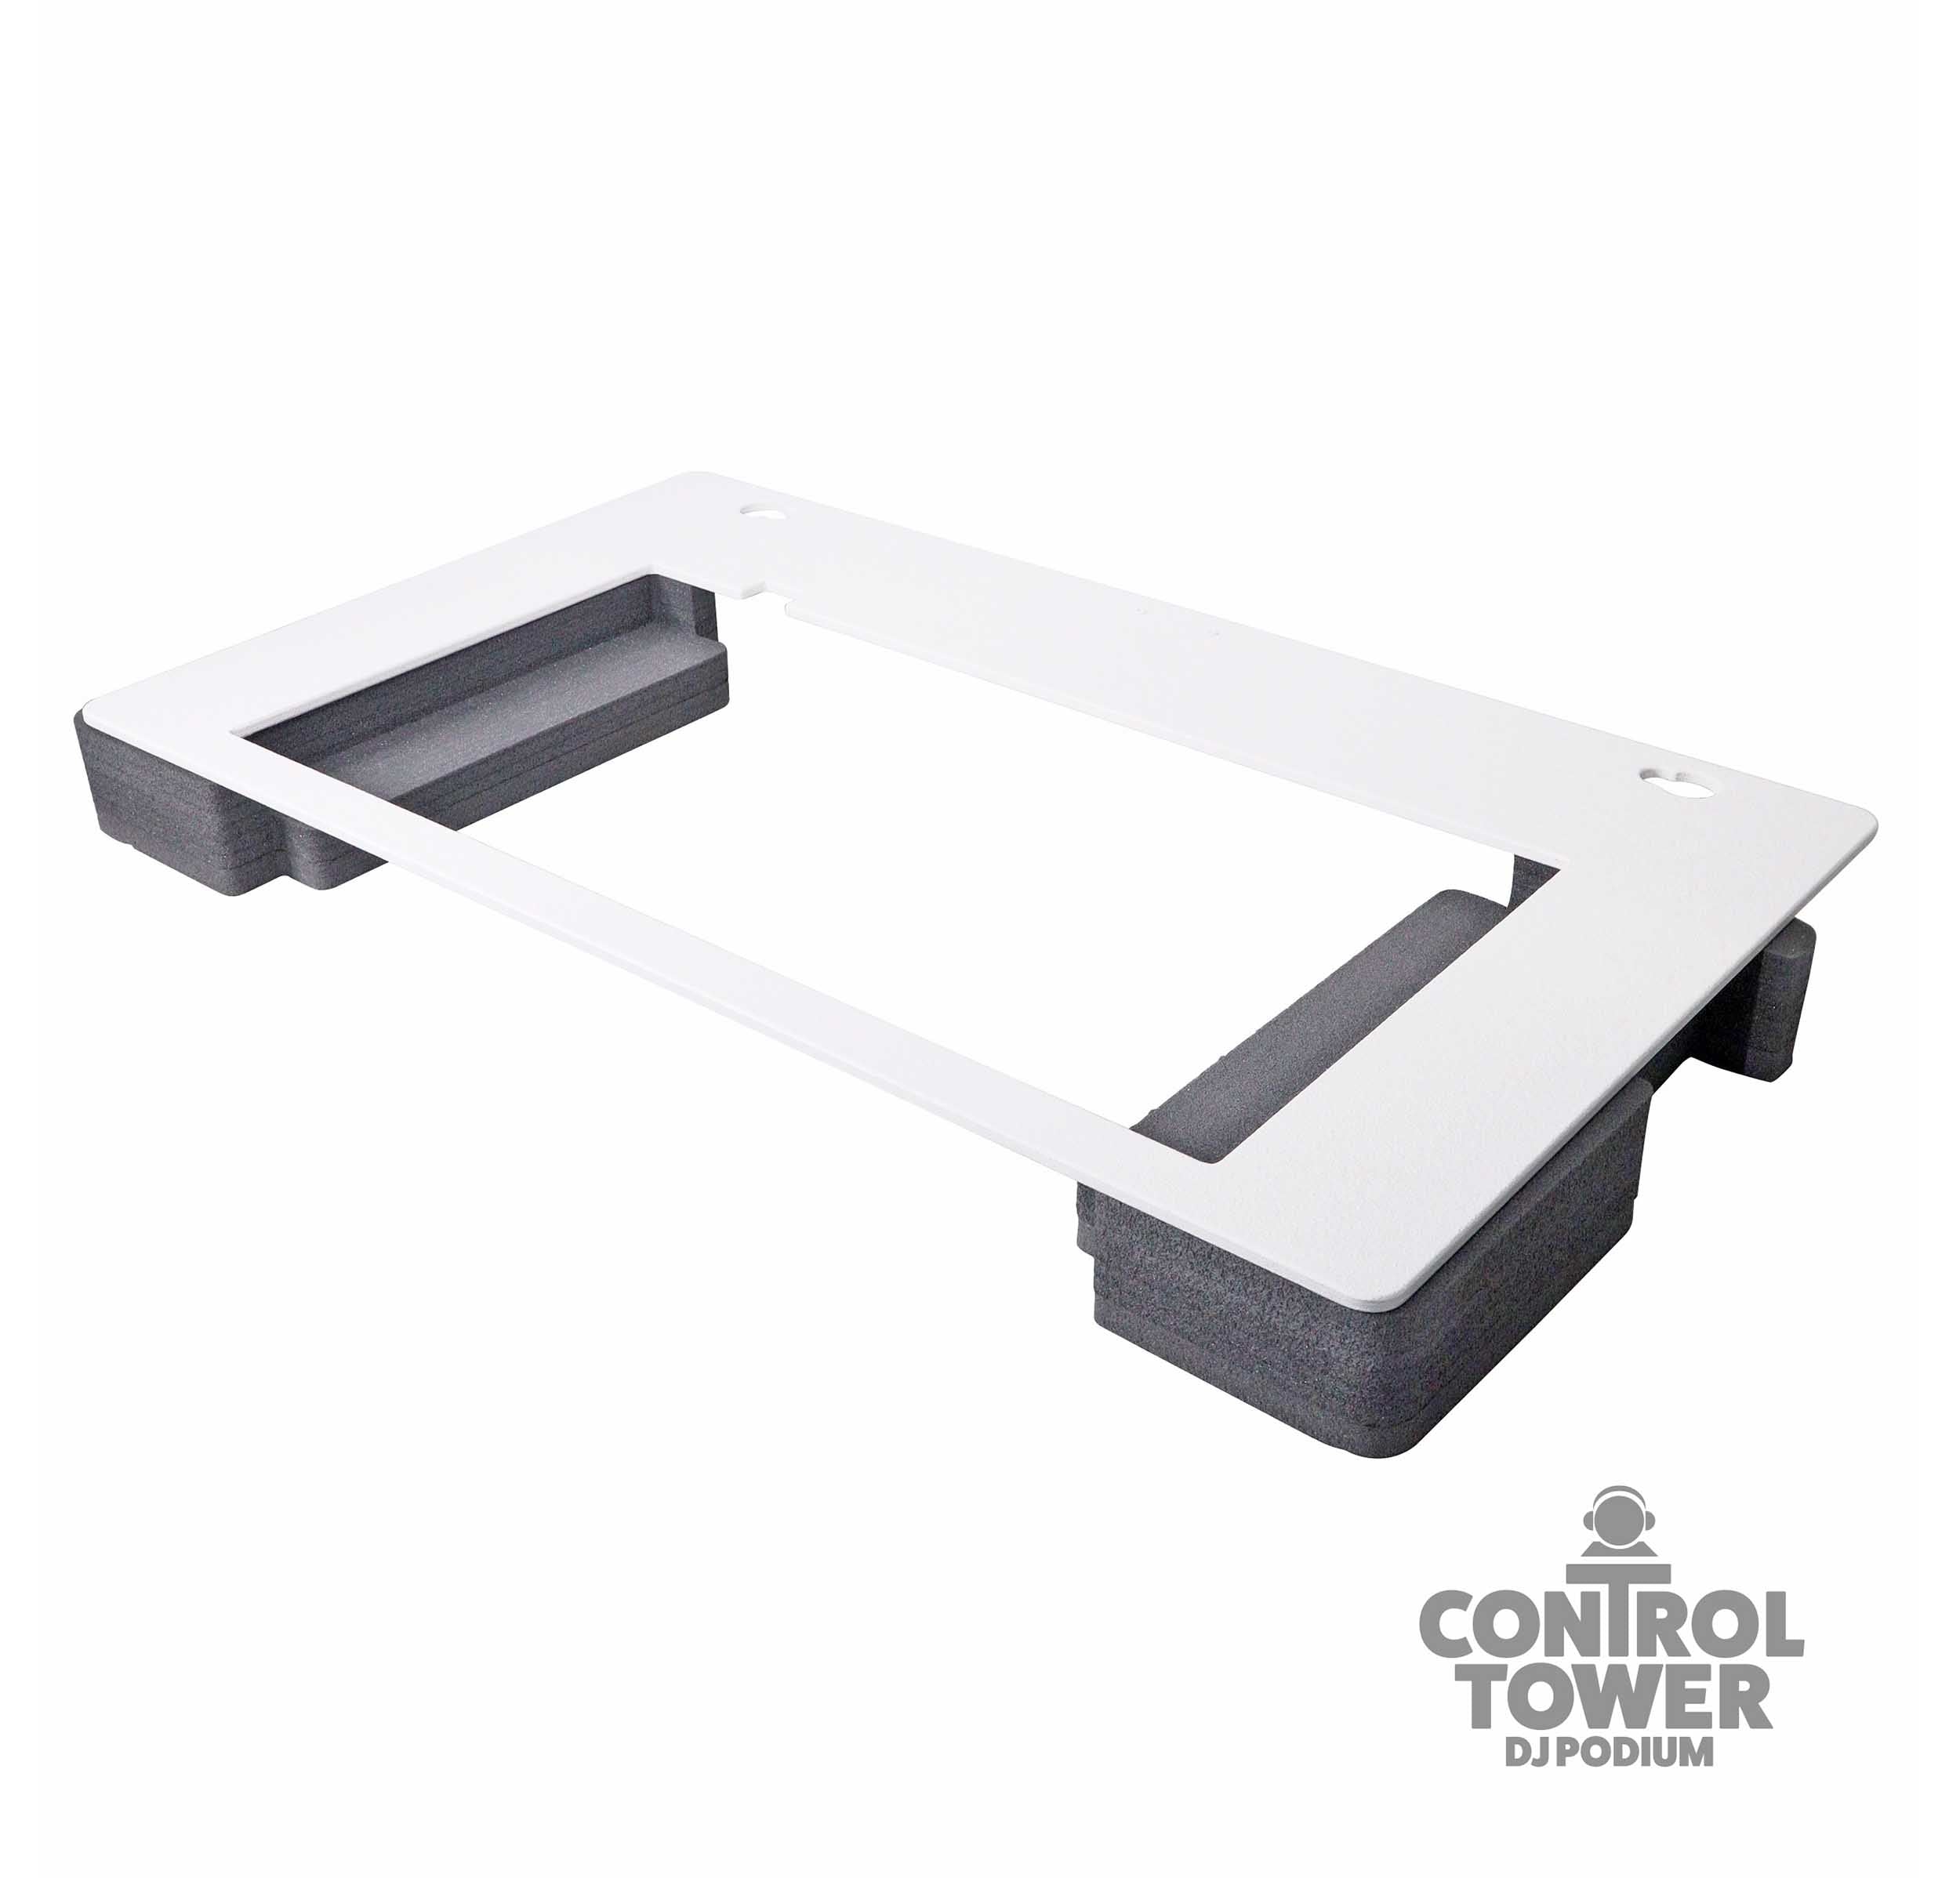 PROX XZF-DJ DDJ800WHPLATE Control Tower DJ Booth Interchangeable Top Plate - White by ProX Cases